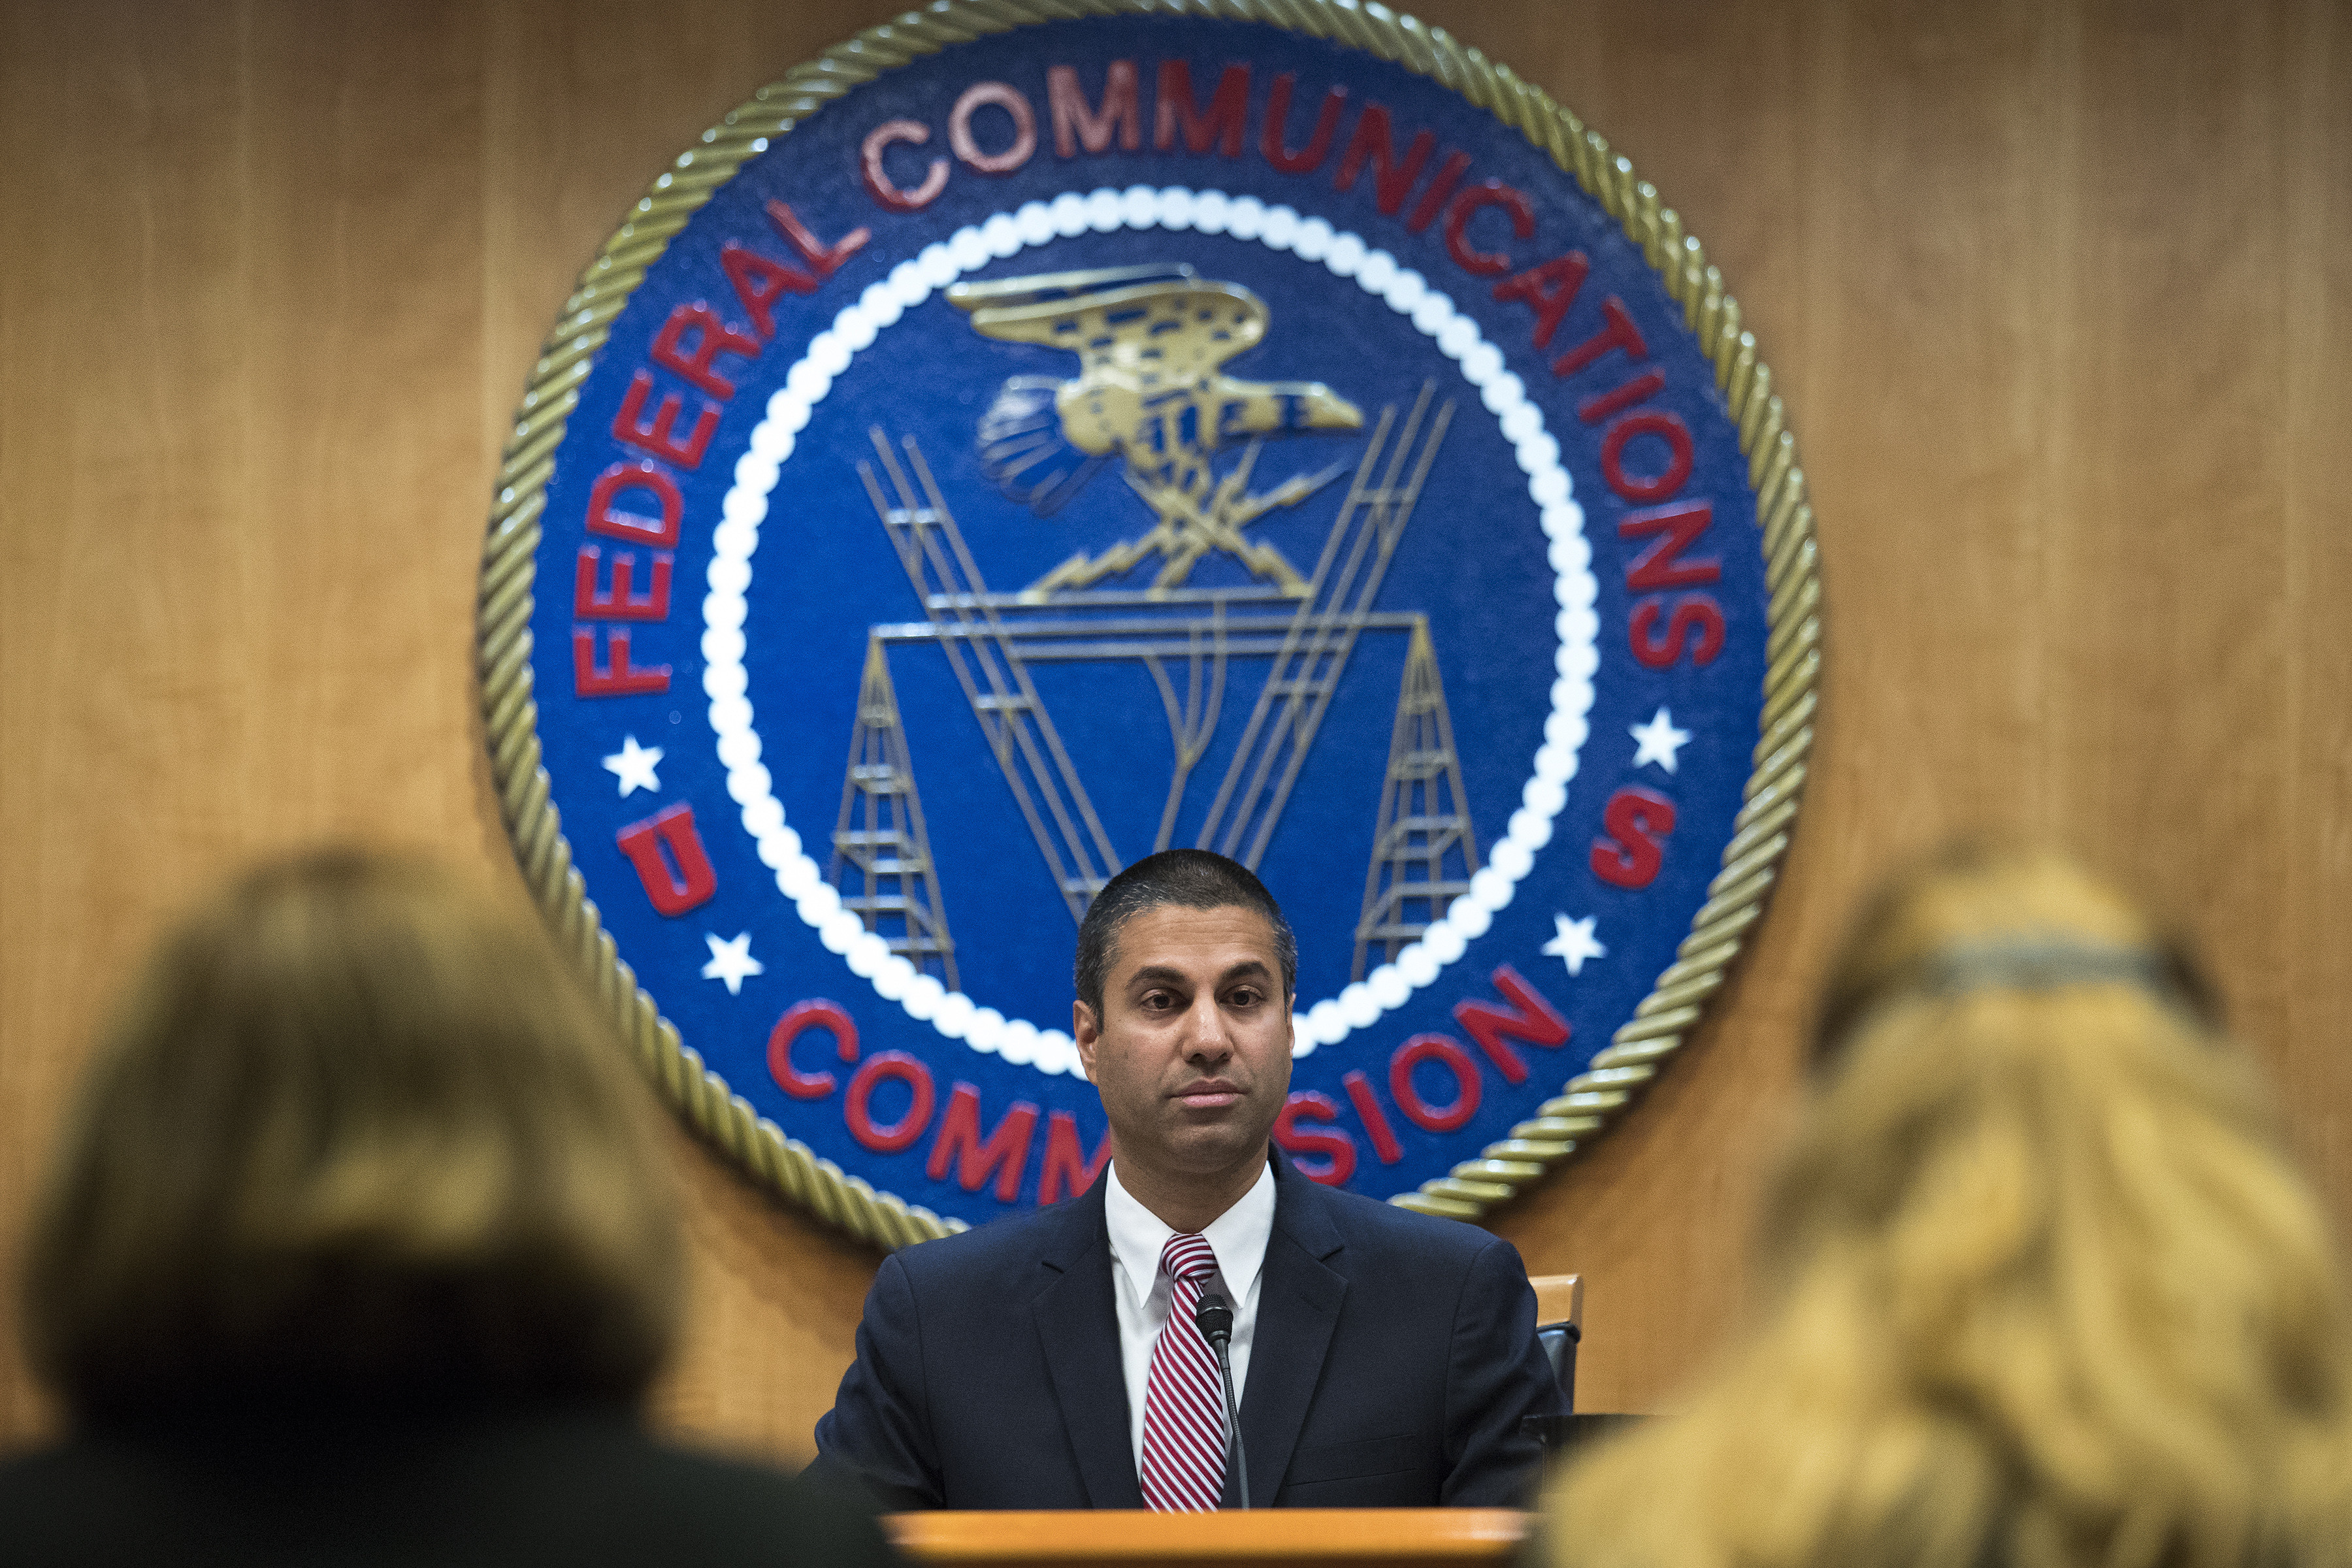 Ajit Pai, chairman of the FCC, delivers remarks at FCC headquarters in 2017. The FCC has recently rolled back rules limiting media ownership, paving the way for the acquisition of Tribune Media by Sinclair, which already is the nation’s largest broadcaster, with more than 190 stations